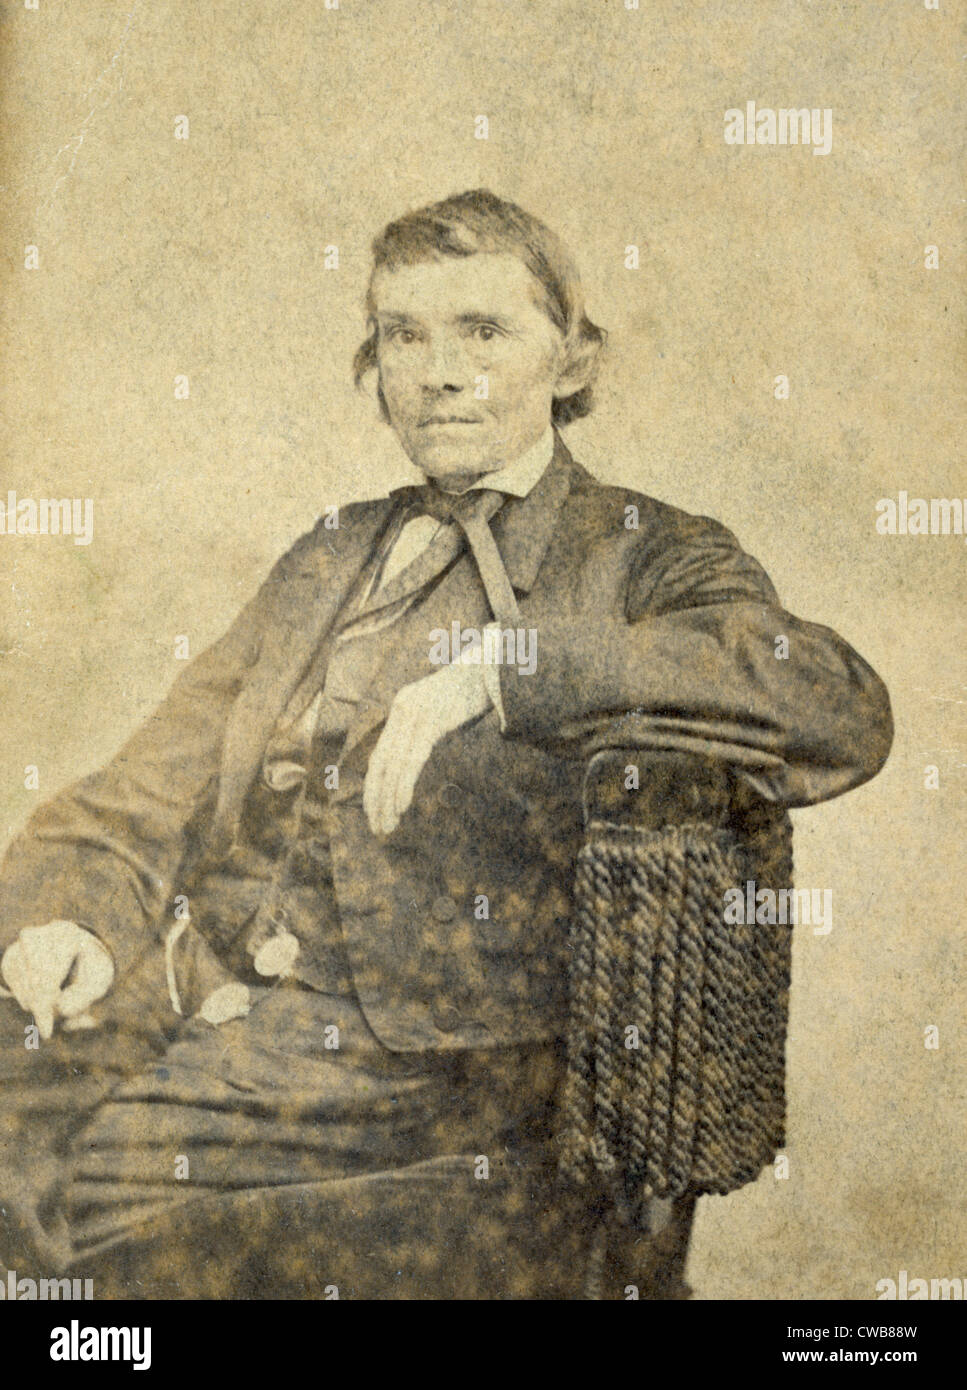 Details about   New Civil War Photo 6 Sizes CSA Confederate Vice President Alexander Stephens 